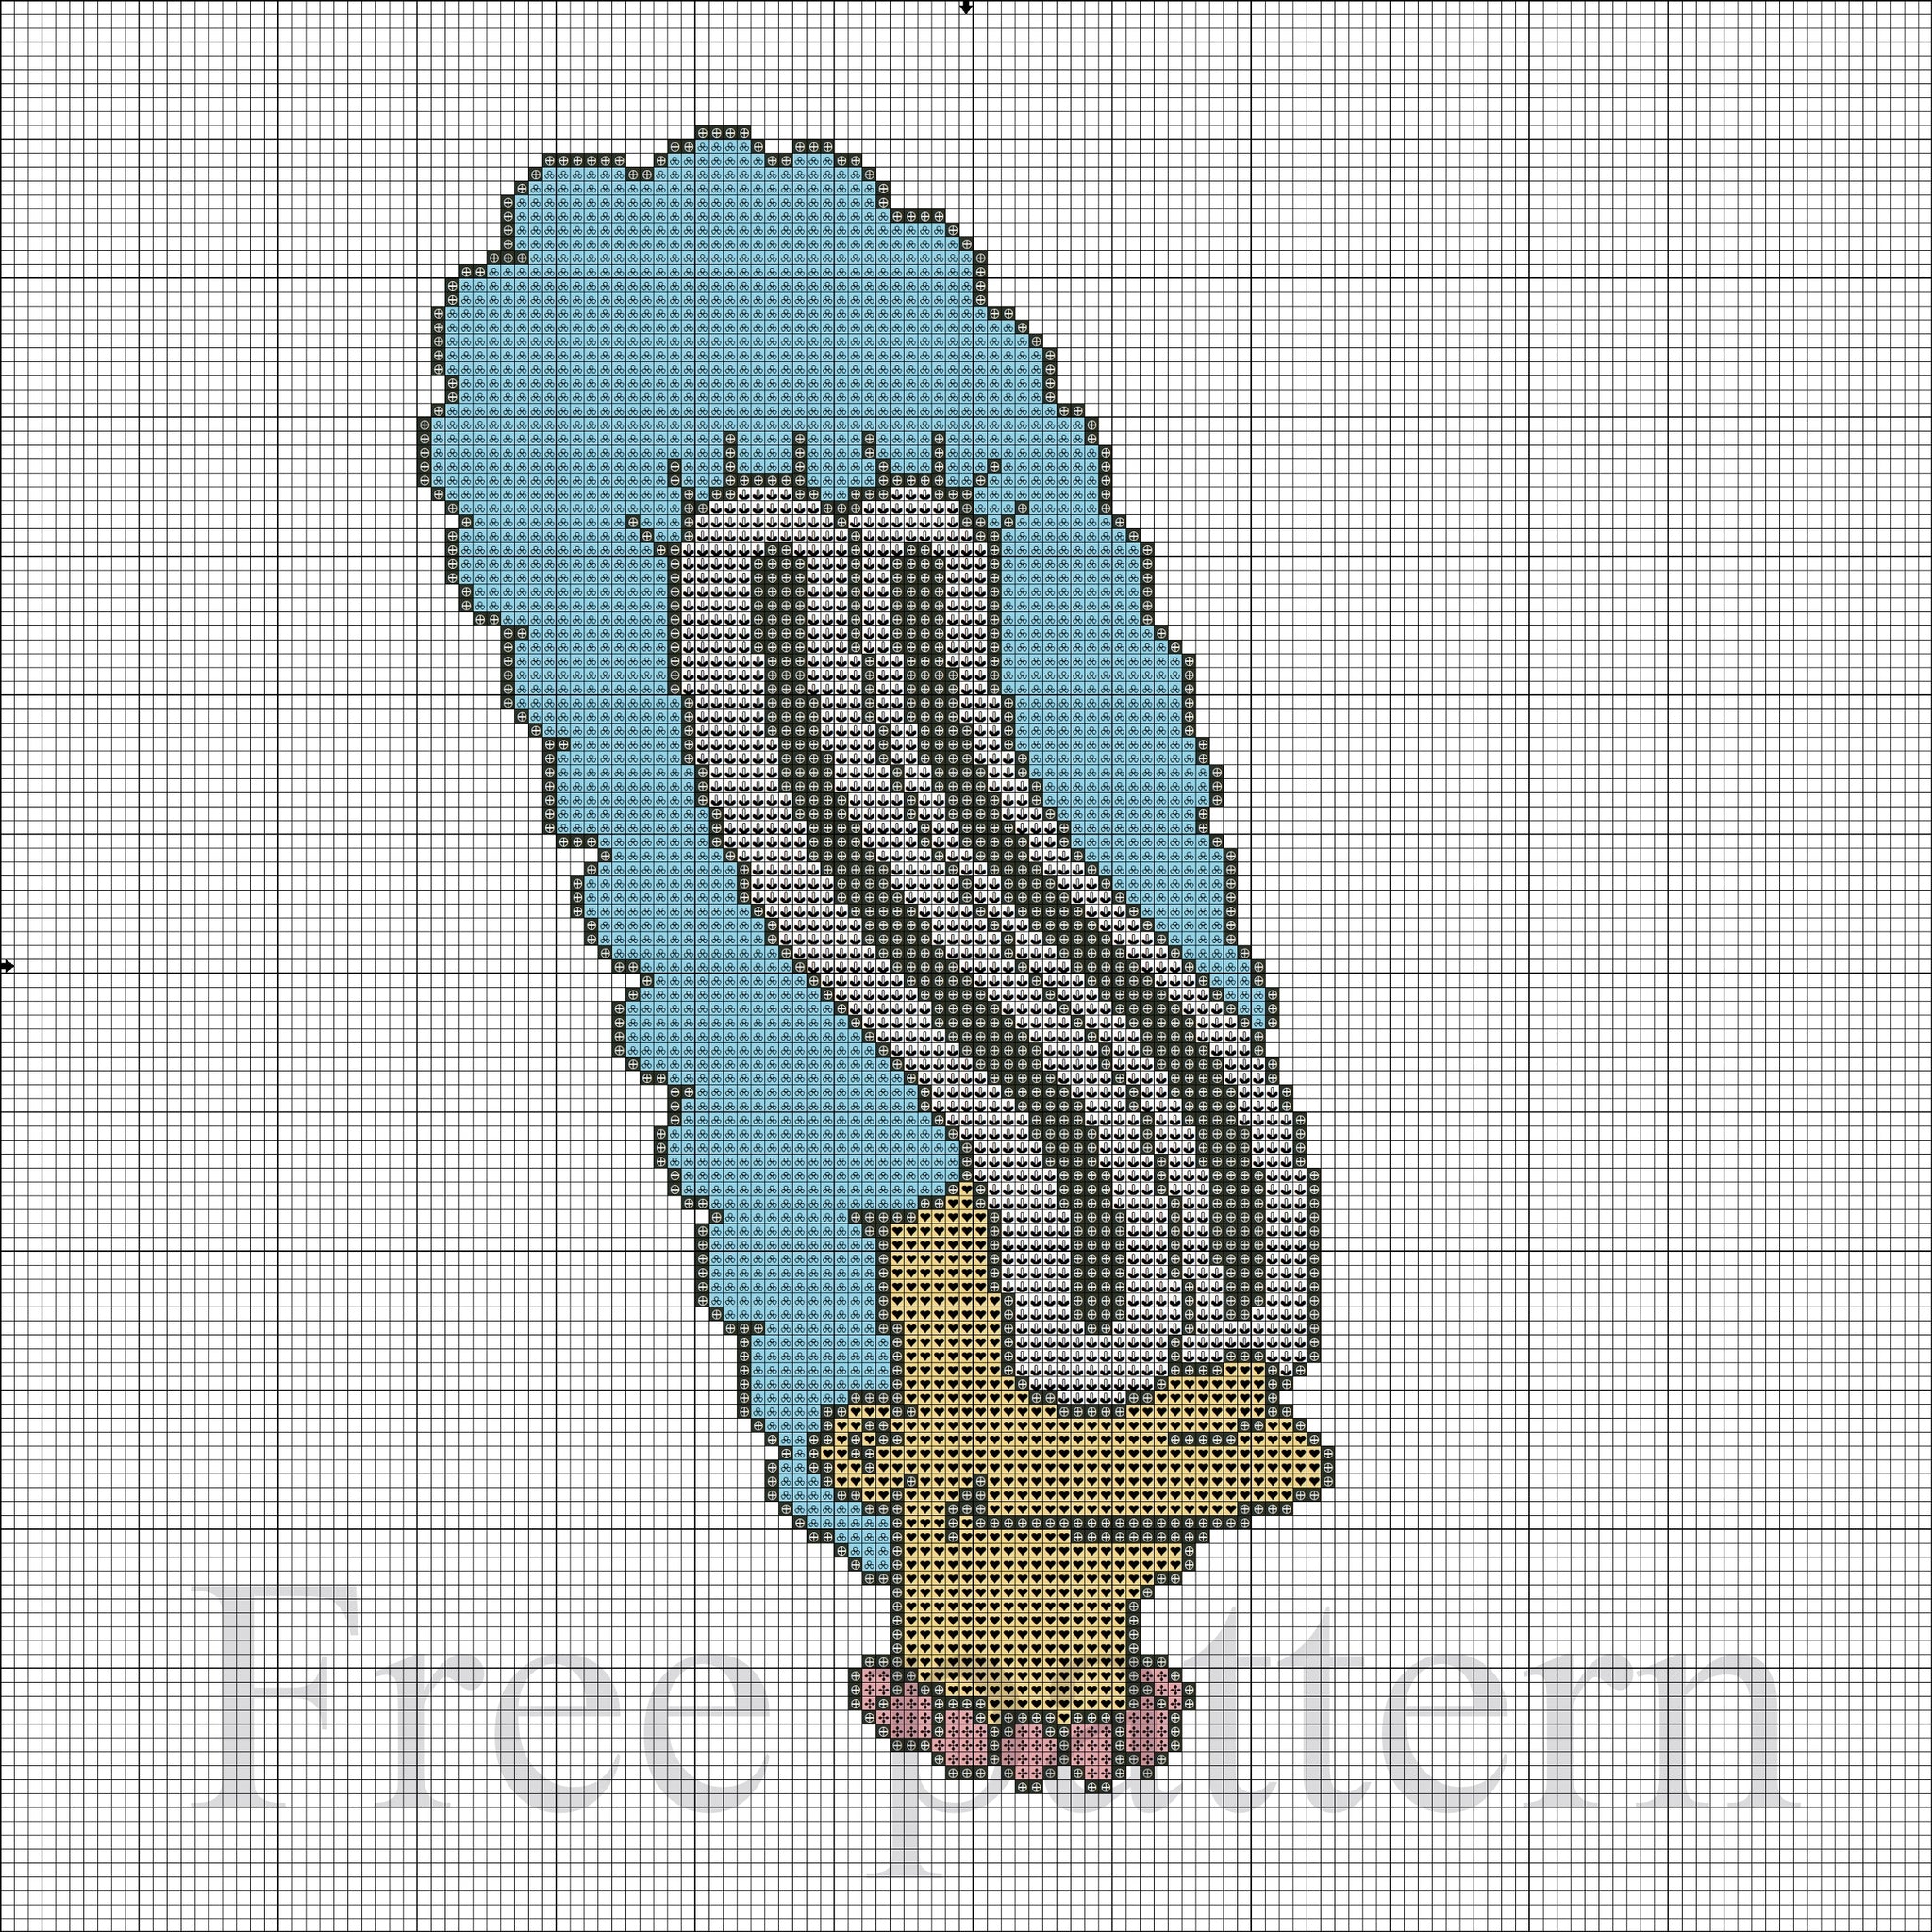 Marge free cross stitch embroidery